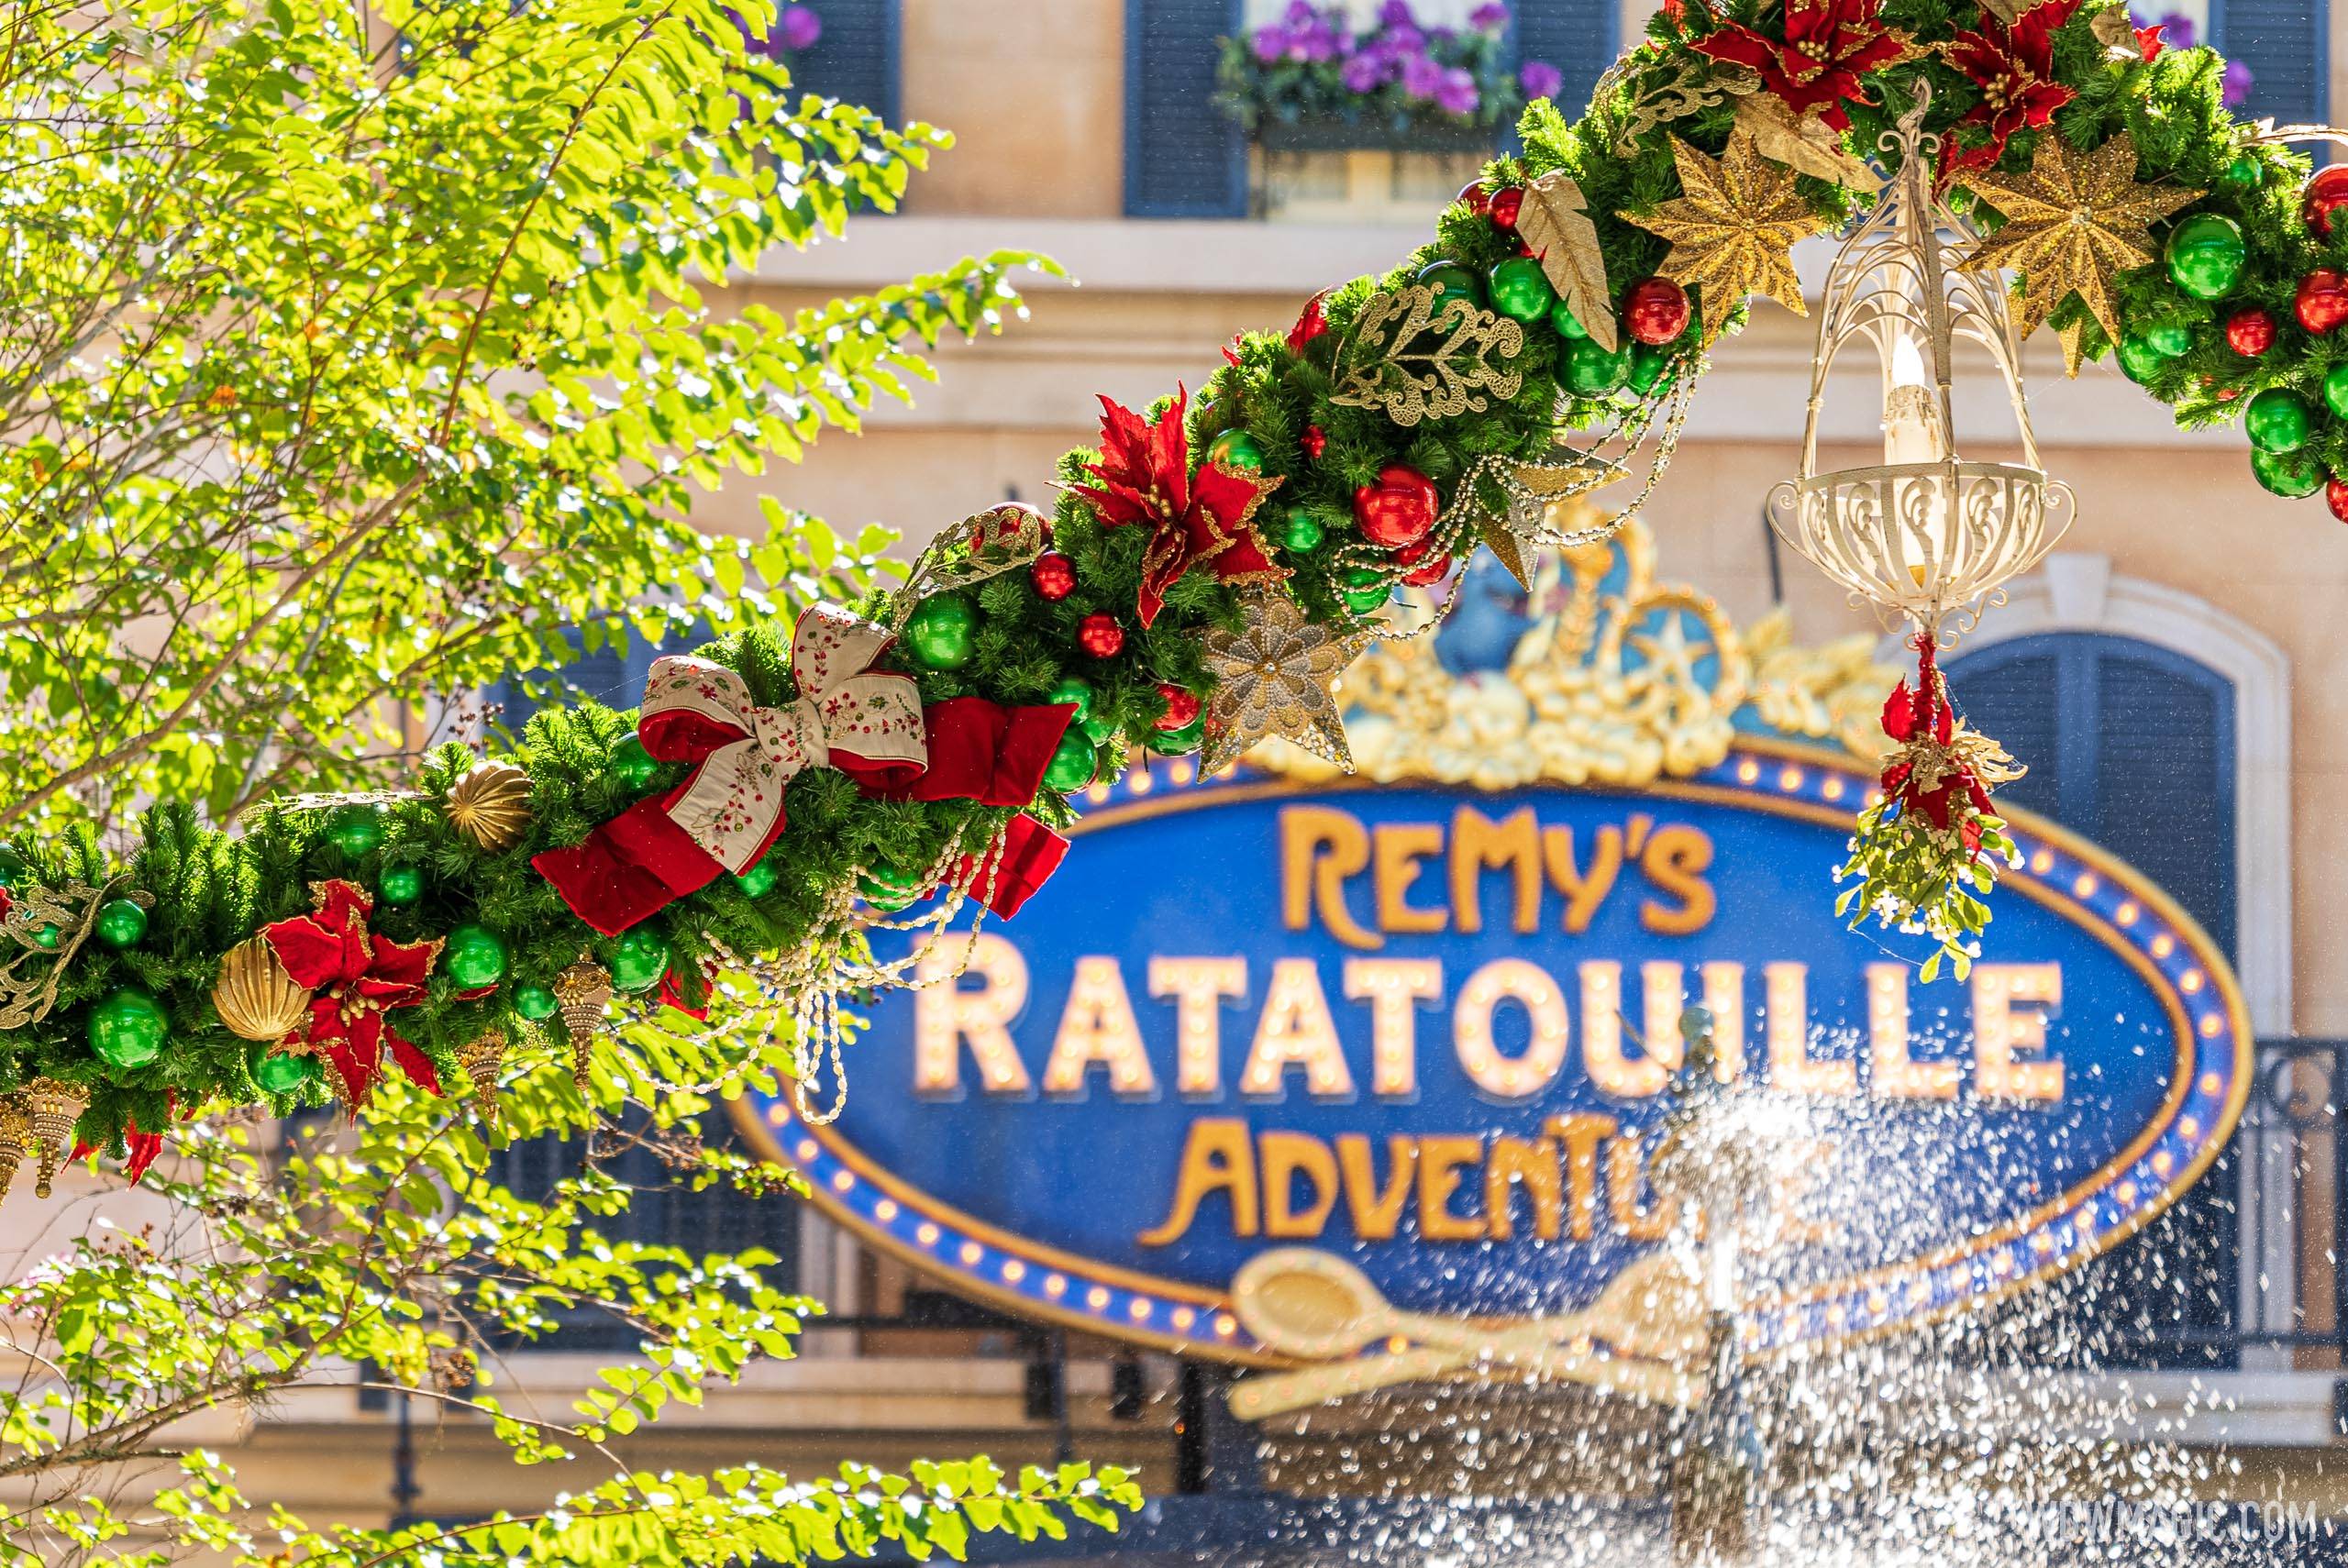 Remy's Ratatouille Adventure will offer a standby line for the first time since its official opening